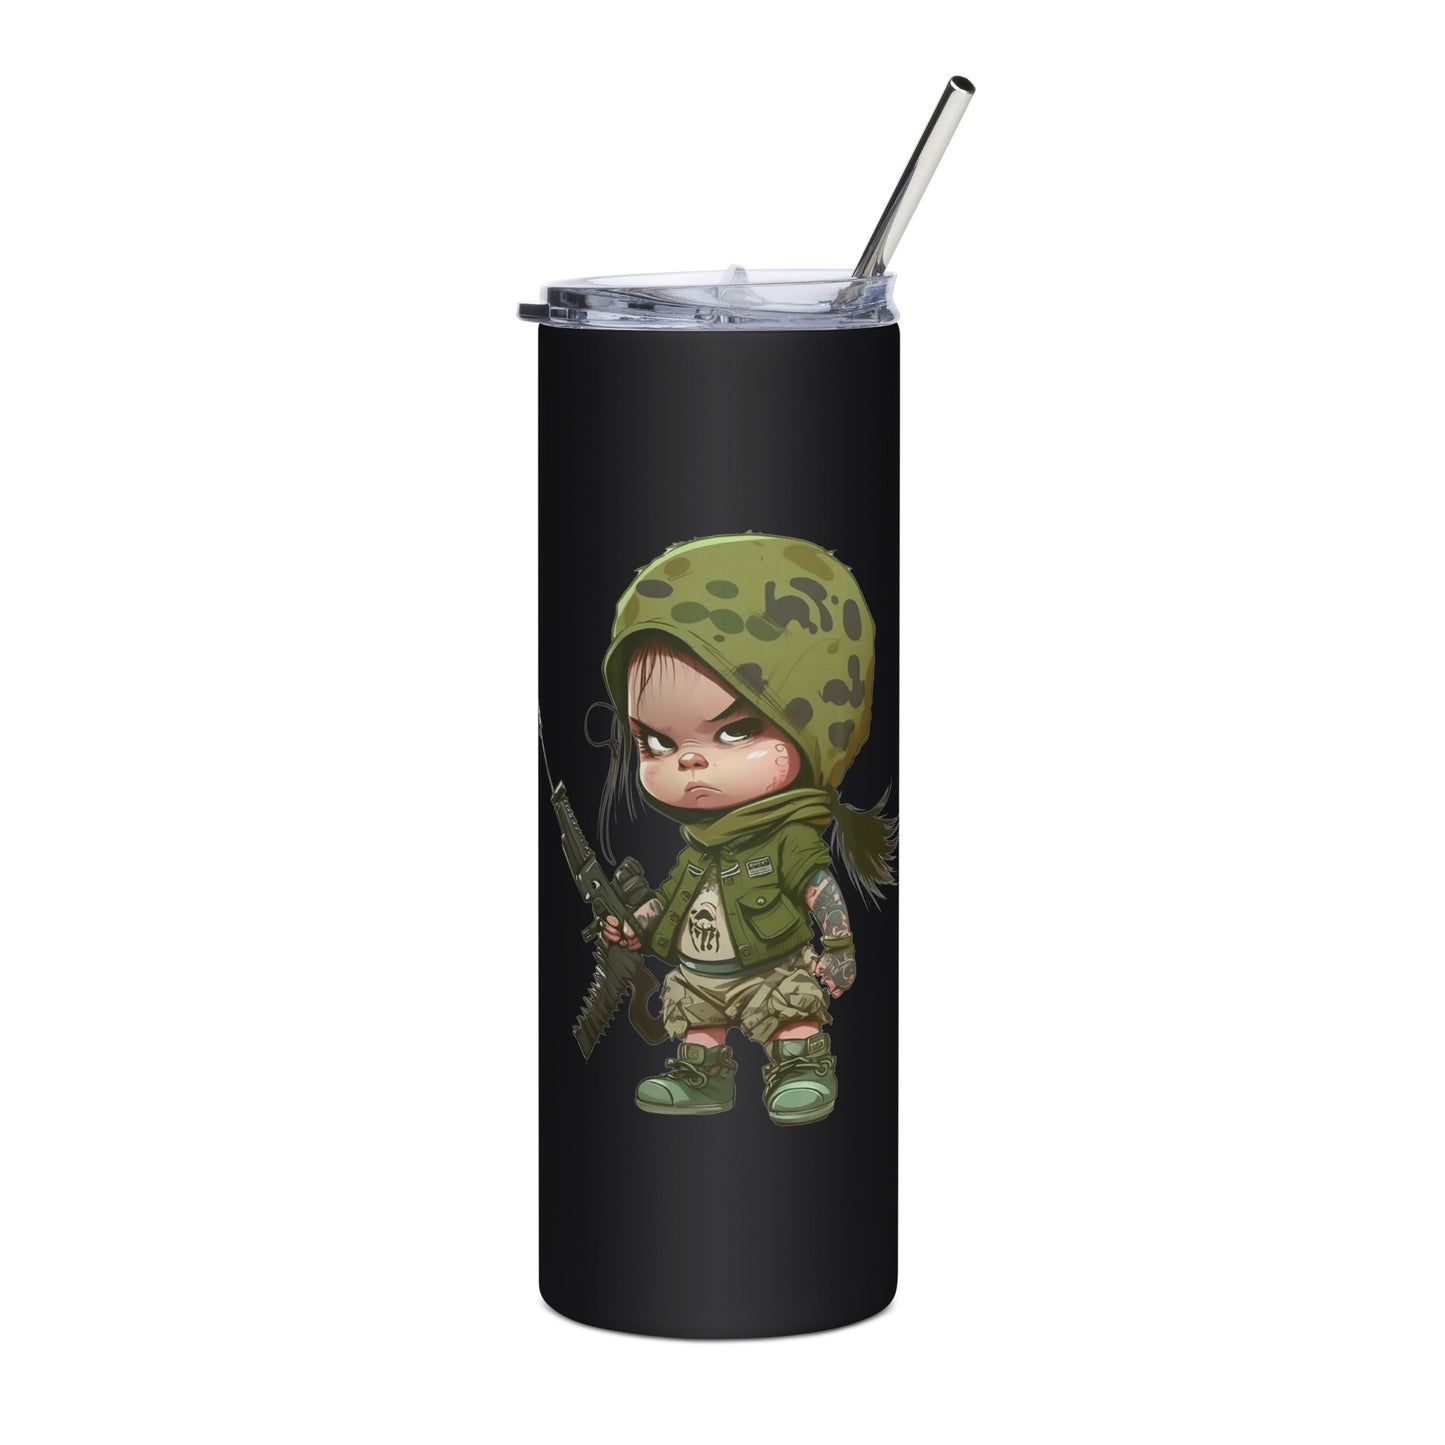 Battle Ready Army Girl Stainless steel tumbler